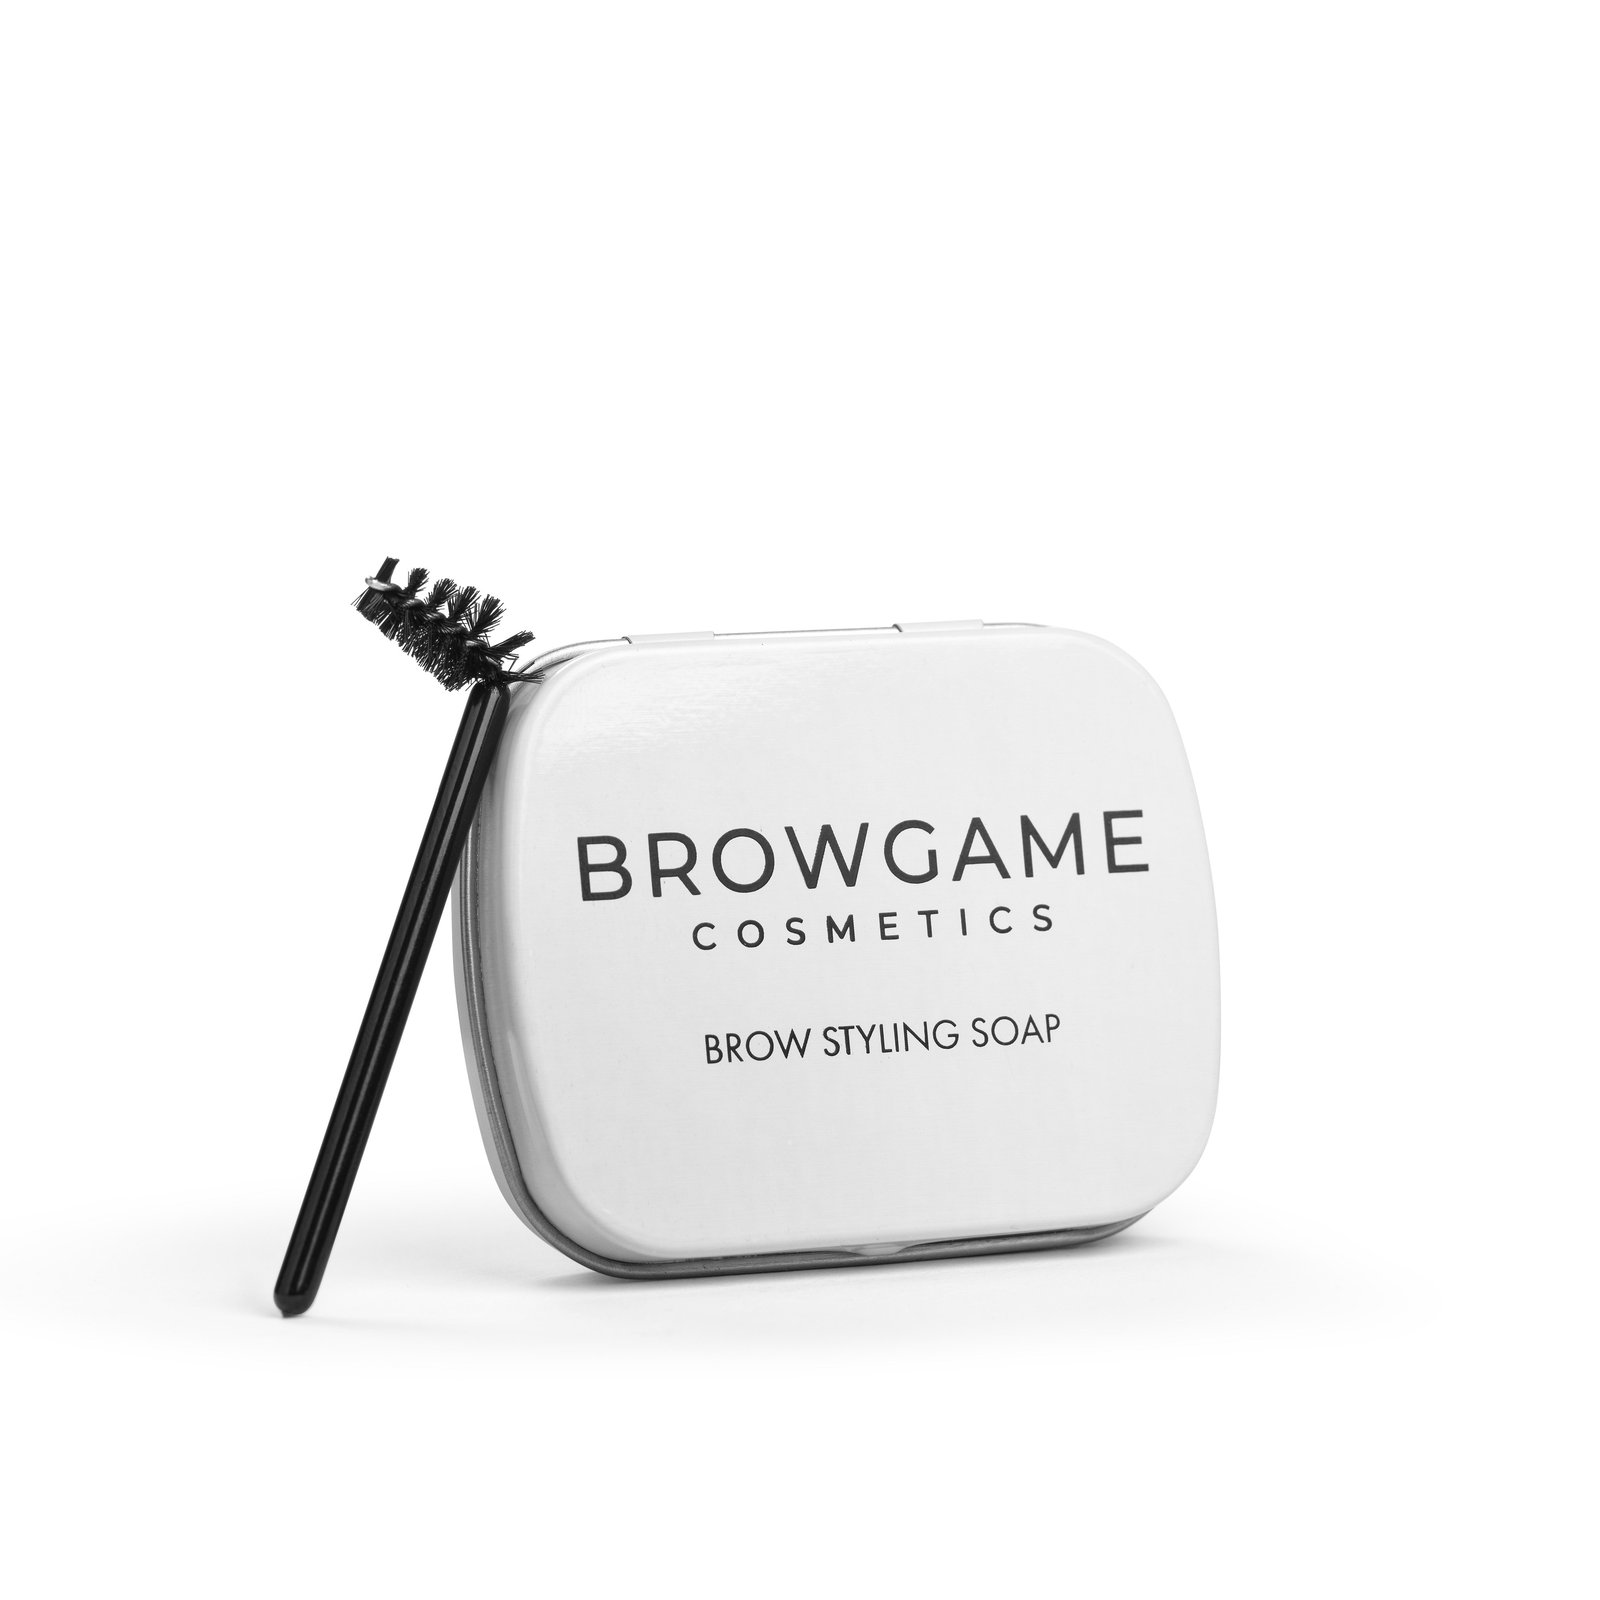 Browgame Cosmetics Styling Soap 20 g